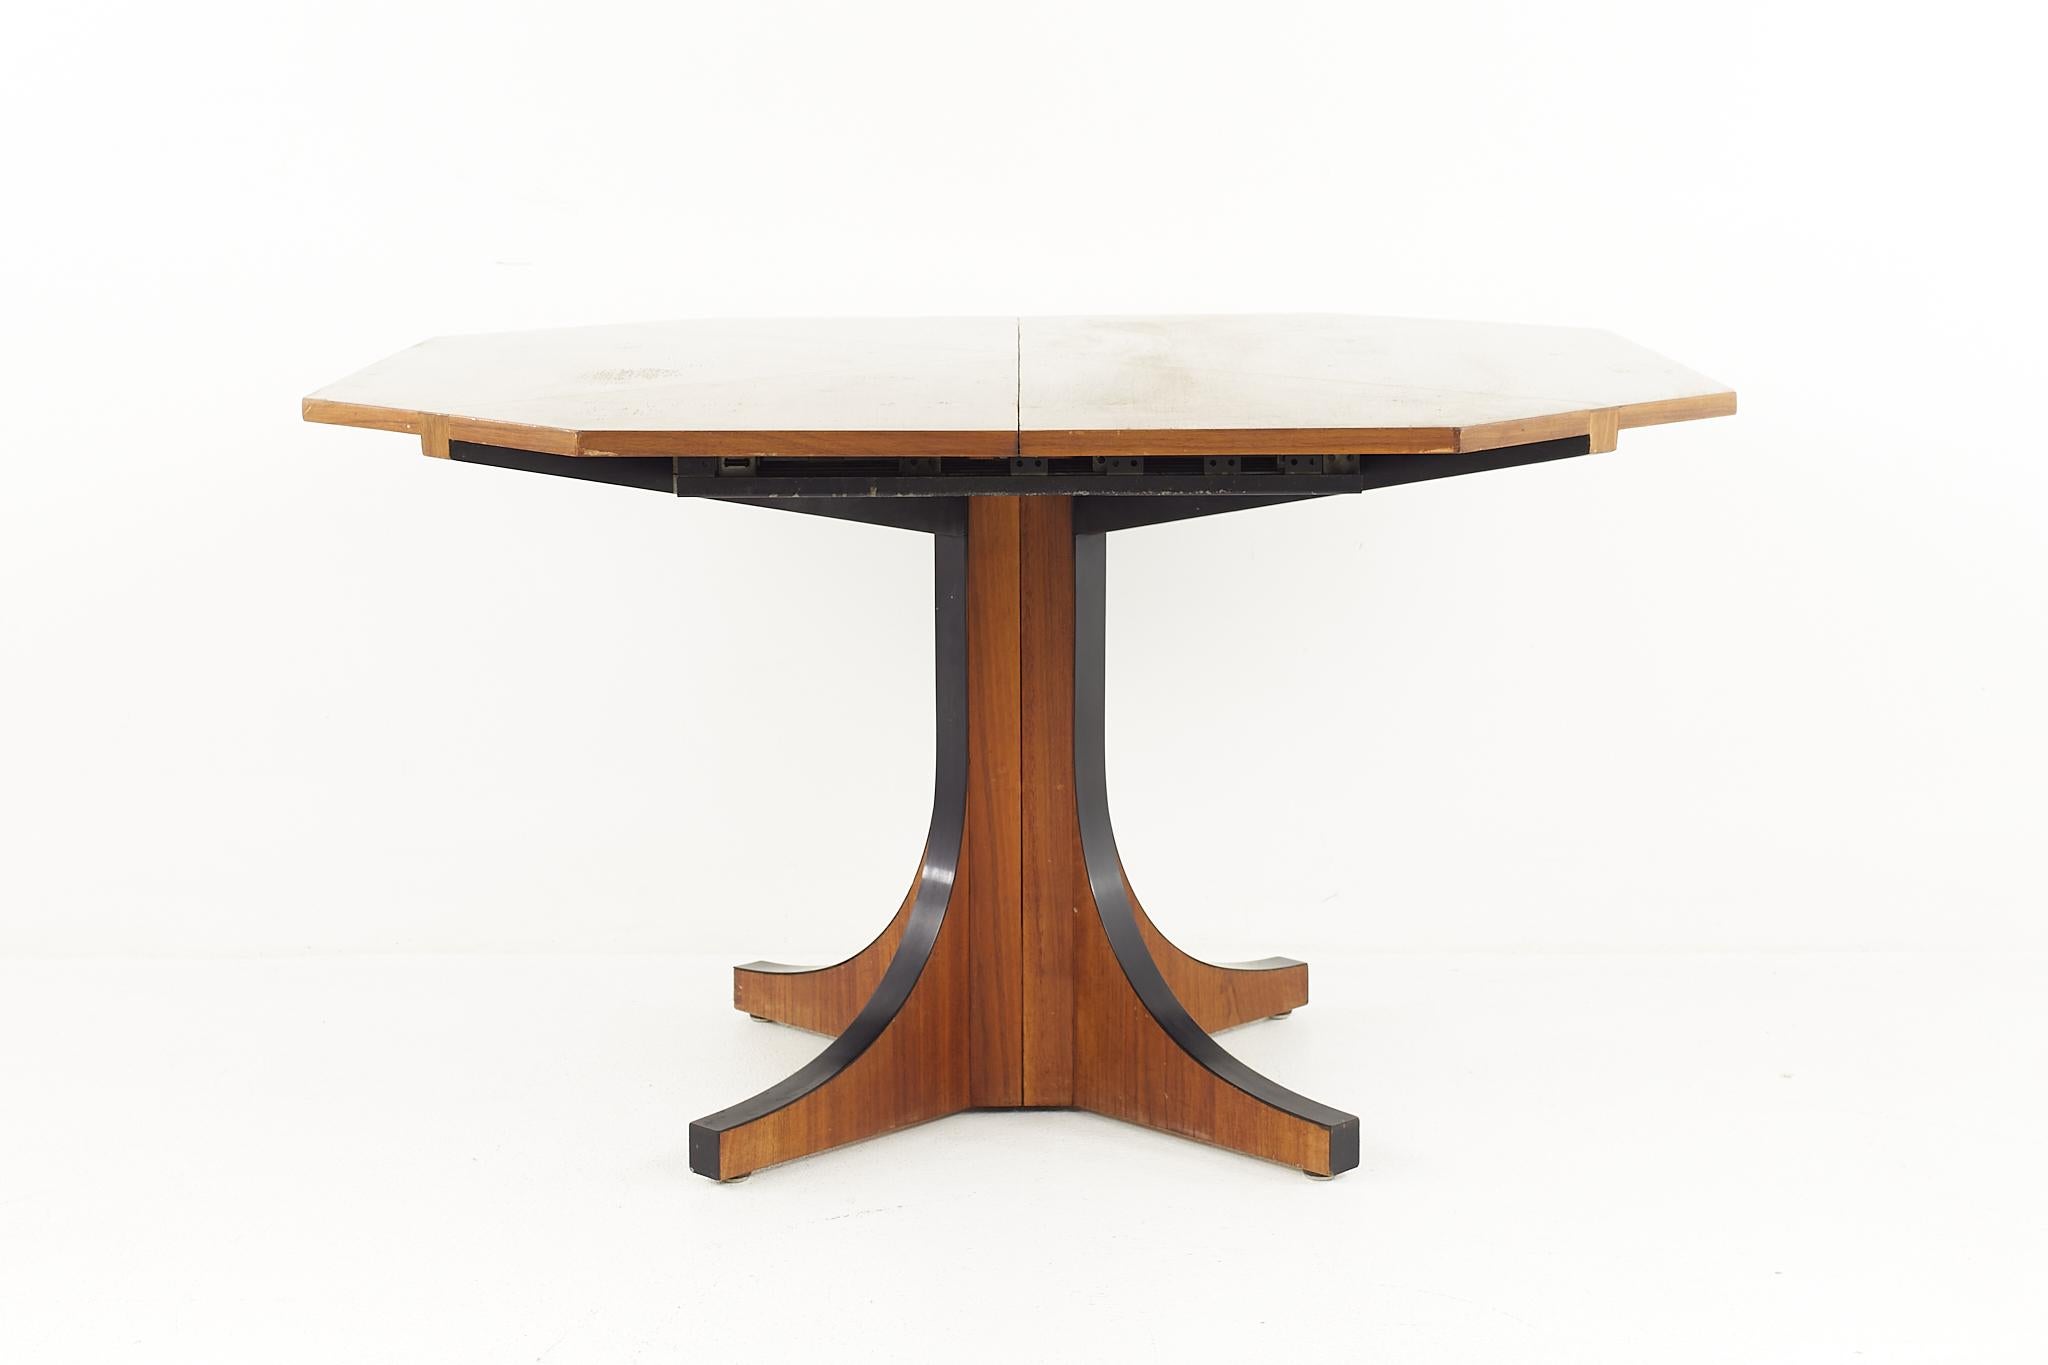 John Kapel for Glenn of California mid century walnut dining table

The table measures: 45.25 wide x 45.25 deep x 26.5 inches high, with a chair clearance of 25.5

All pieces of furniture can be had in what we call restored vintage condition.